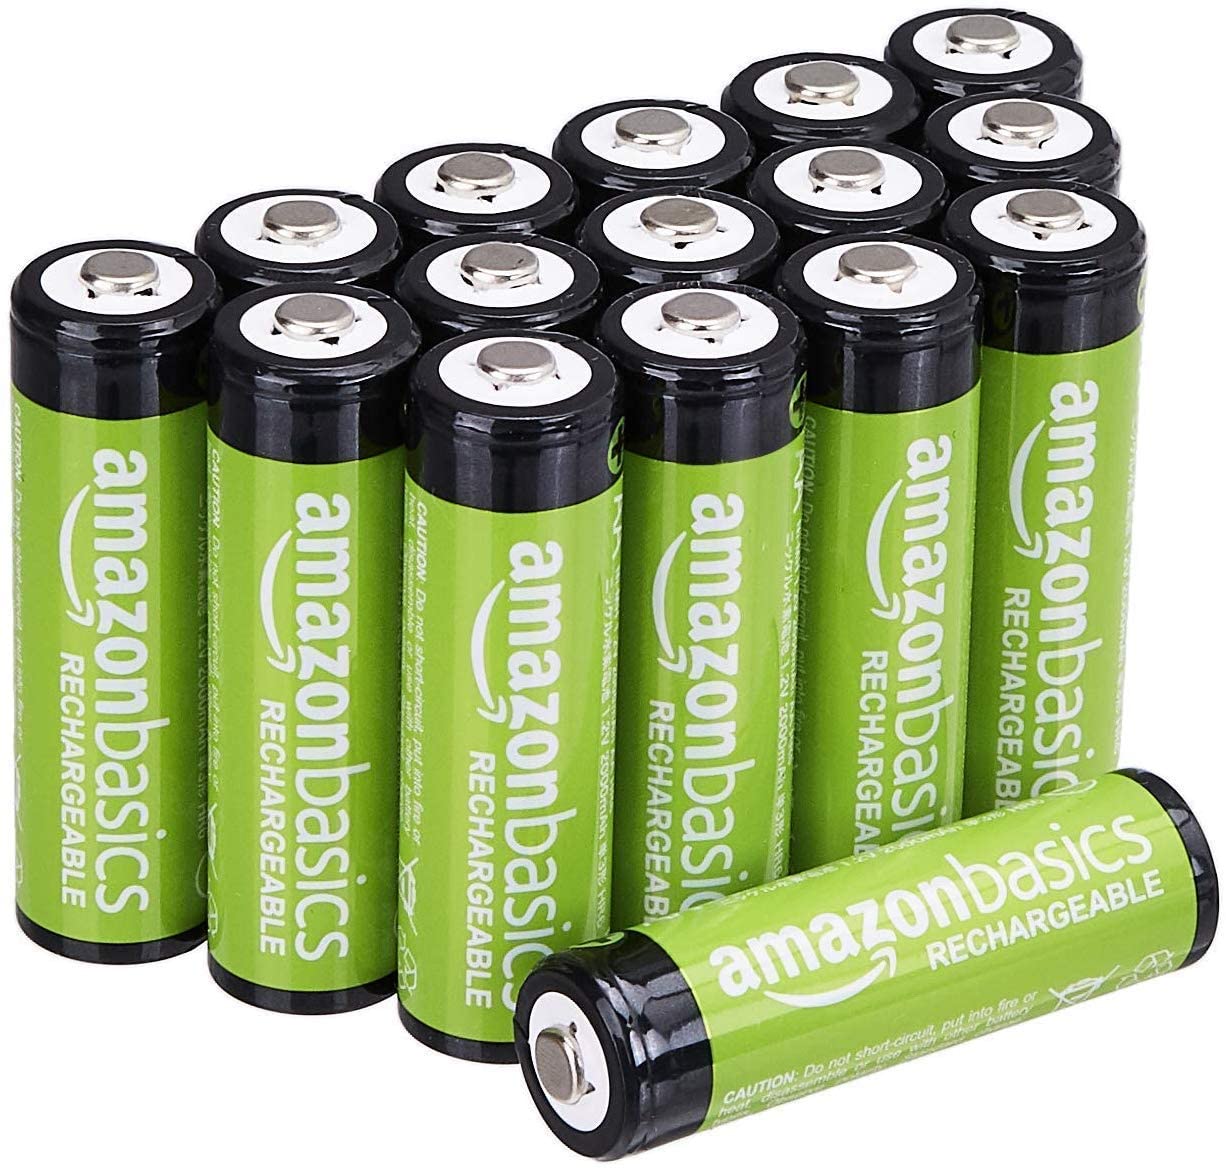 Amazon Basics 16-Pack AA Performance 2,000 mAh Rechargeable Batteries, Pre-Charged, Recharge up to 1000x $18.39 YMMV